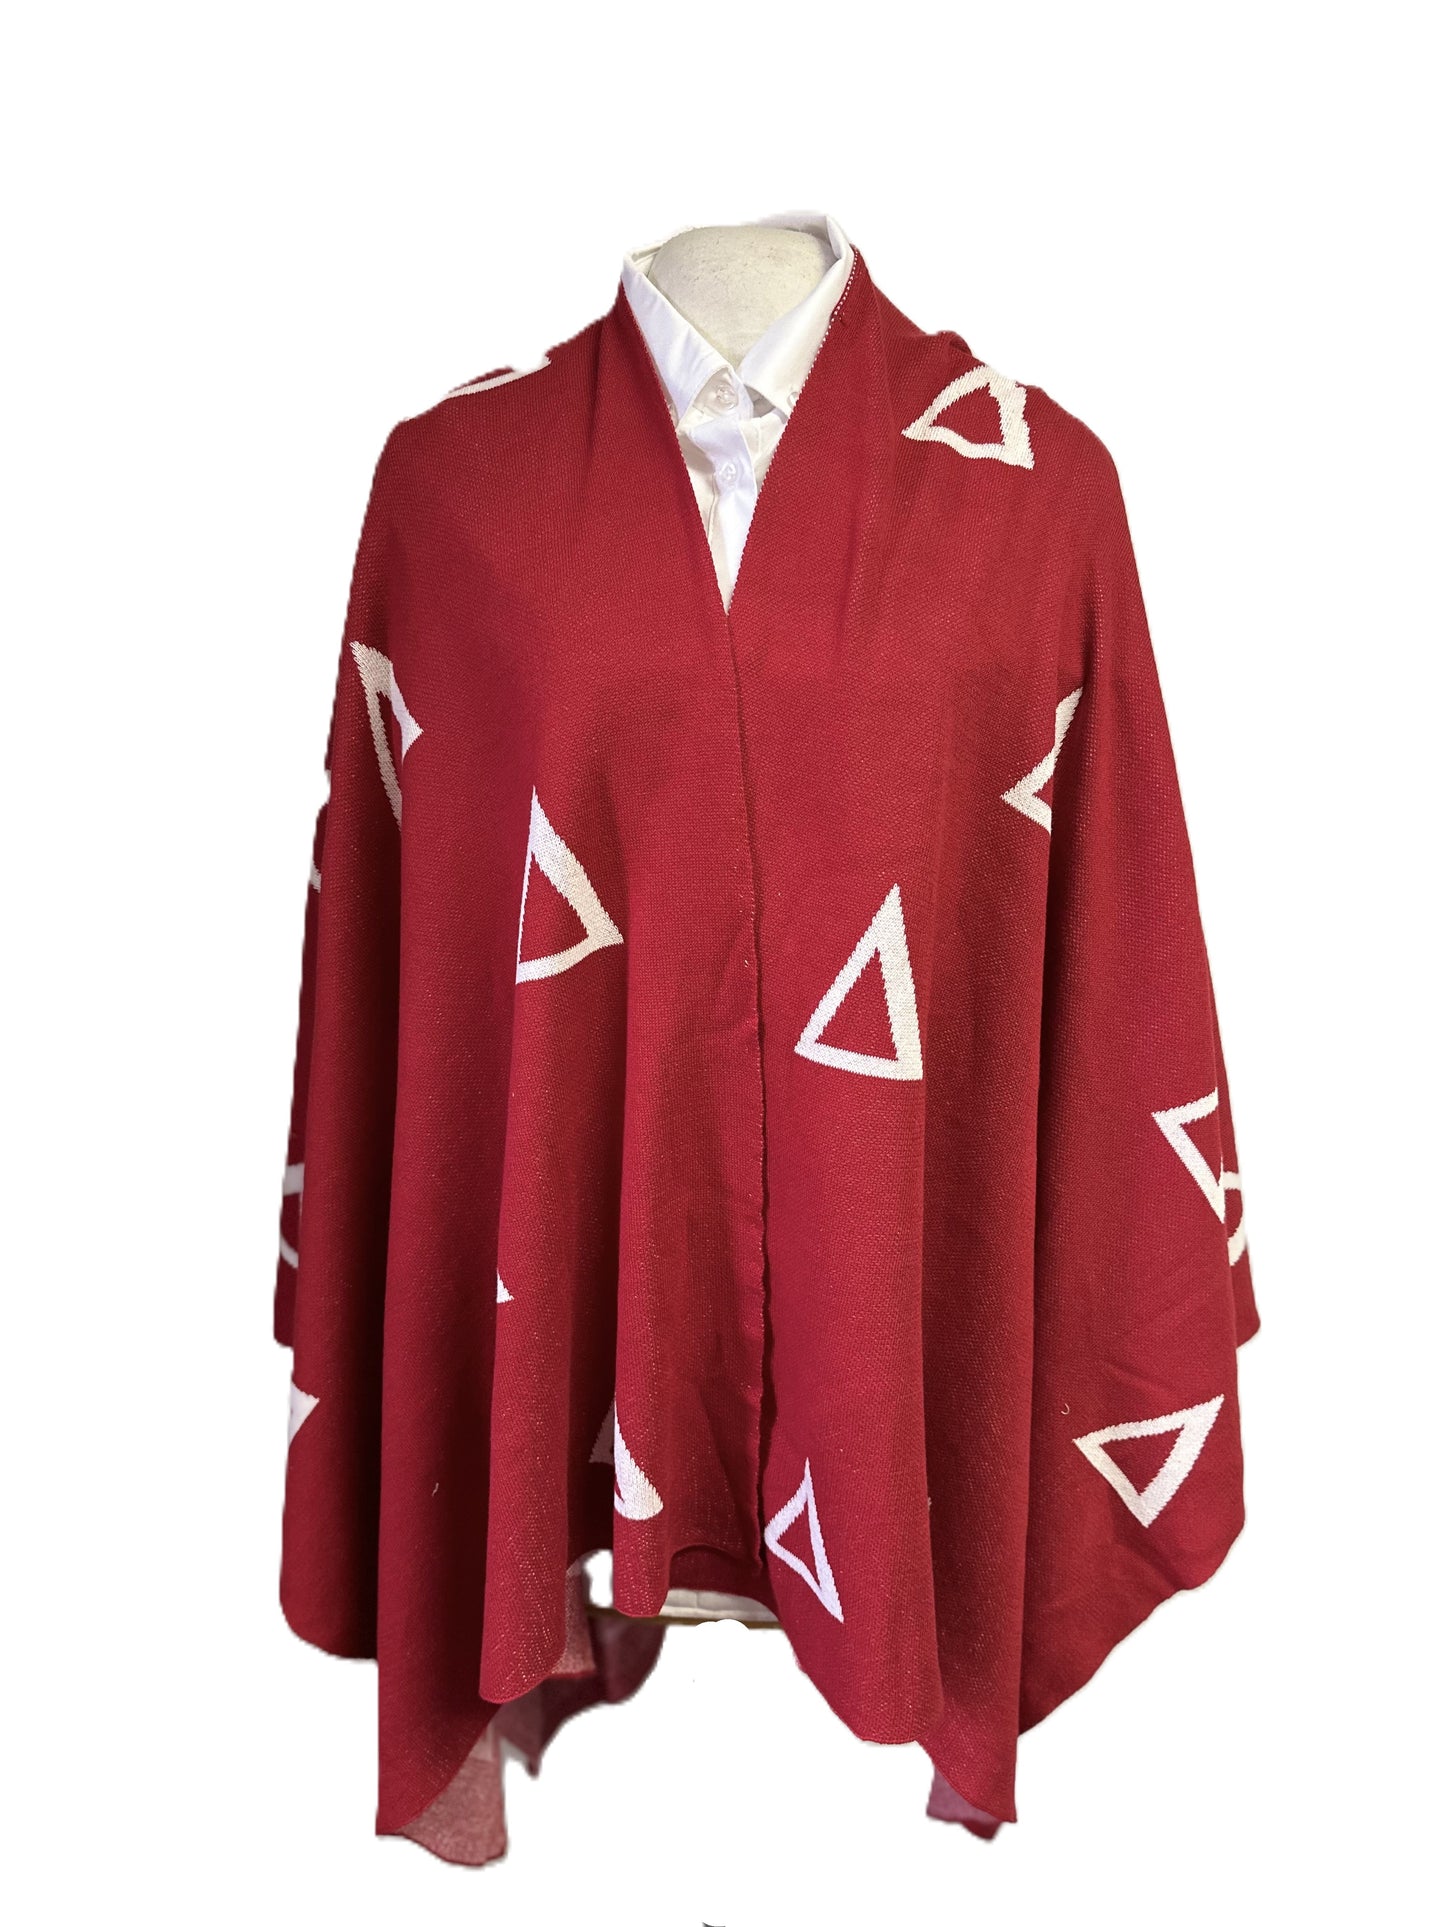 Delta Sigma Theta DST Red & White, Cozy Wrap/cape/shrug/poncho For Women, Size Fits All, Stylish, Made in INDIA